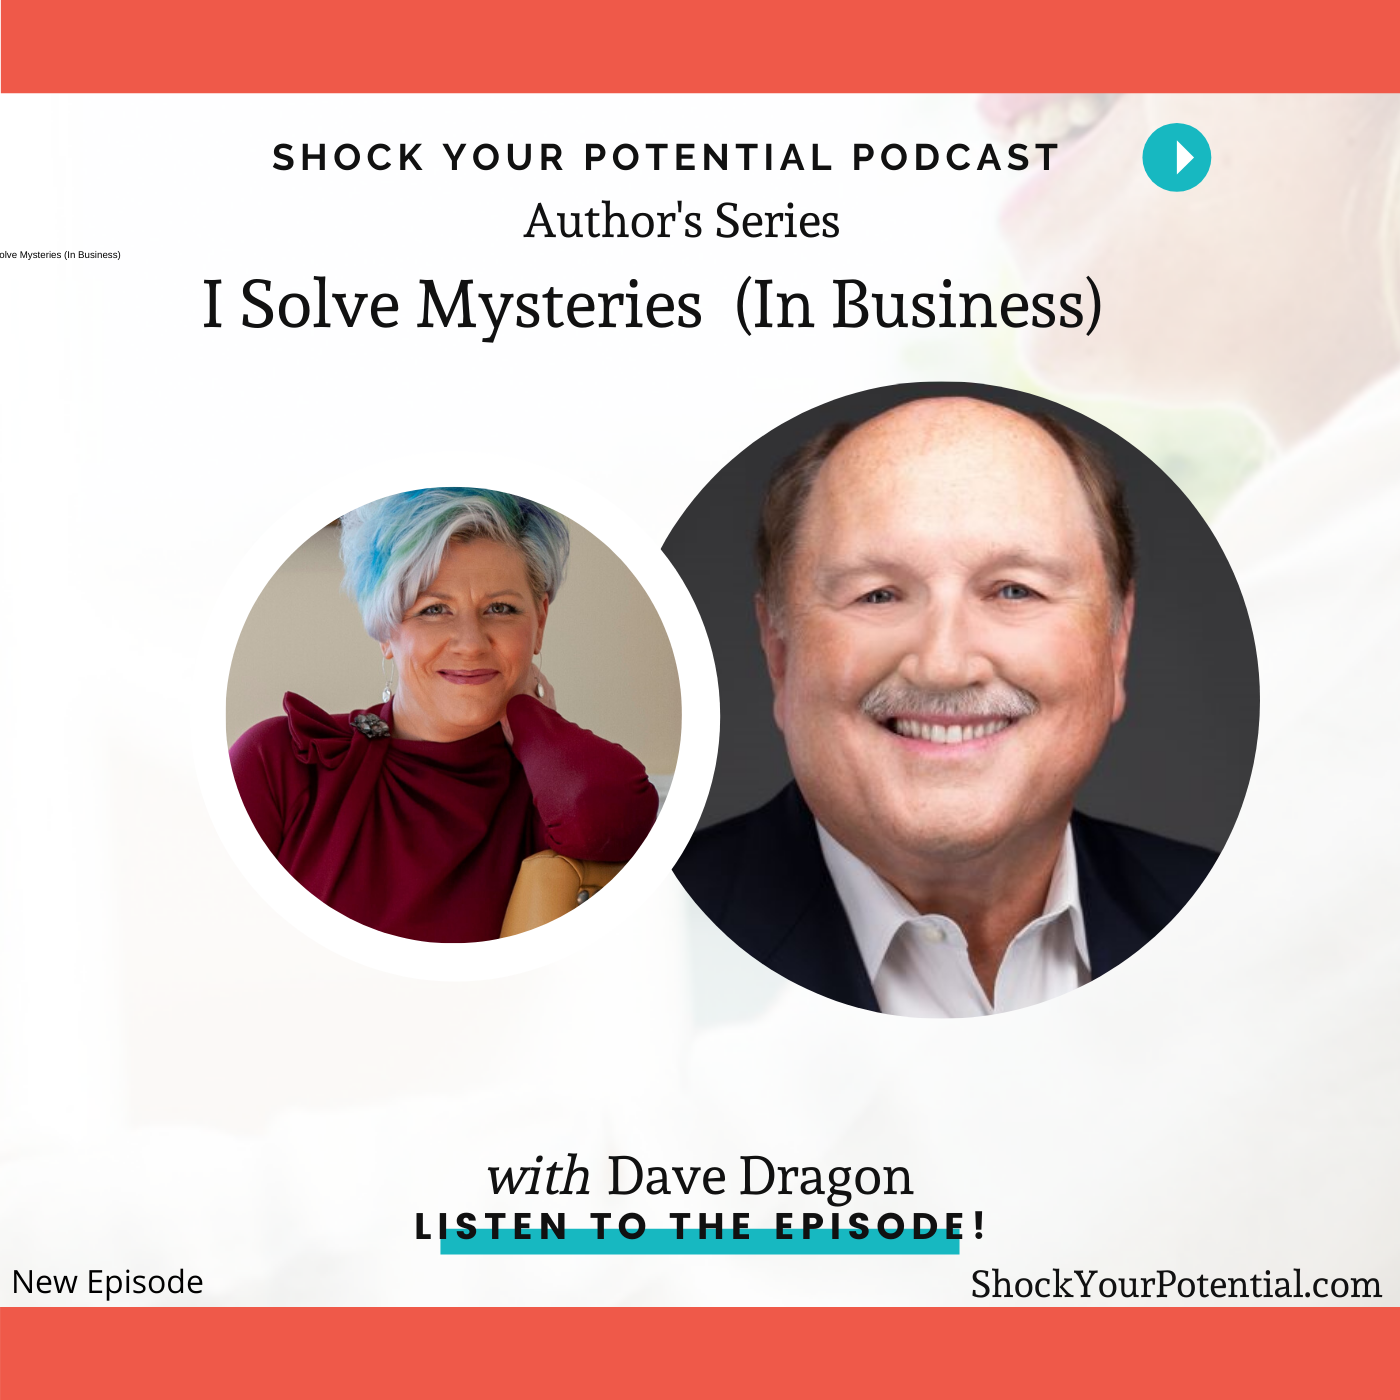 I Solve Mysteries (In Business) – Dave Dragon